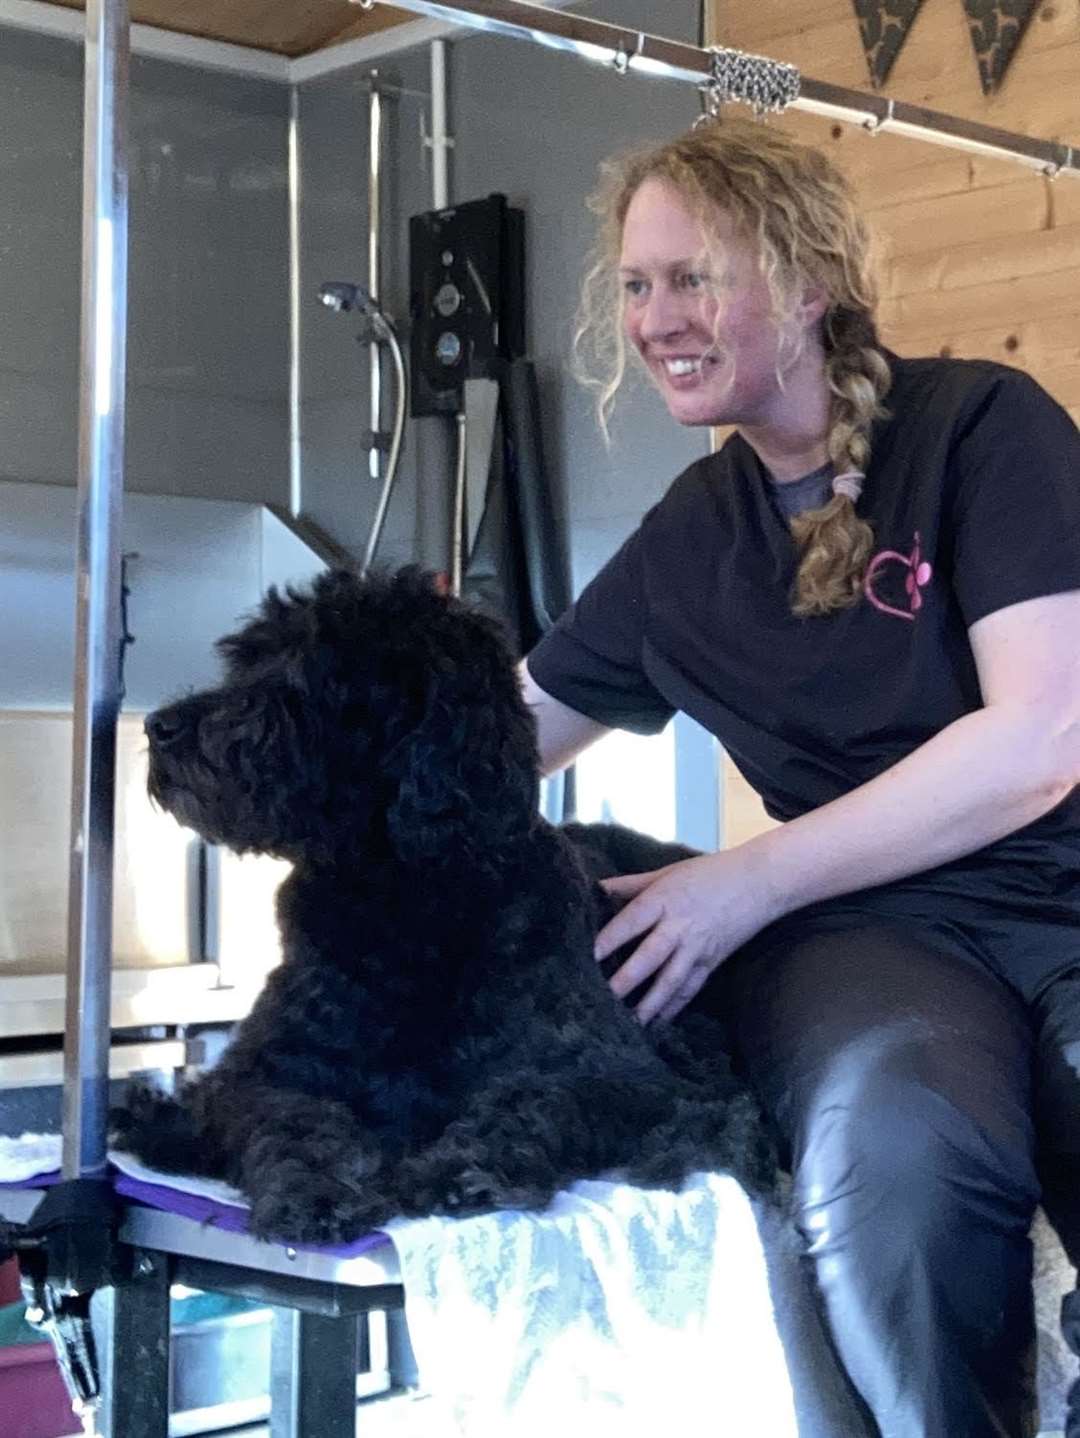 Victoria owns Ultimuttly Groomed, a professional dog grooming salon in Dornoch, which has been running for almost 5 years.